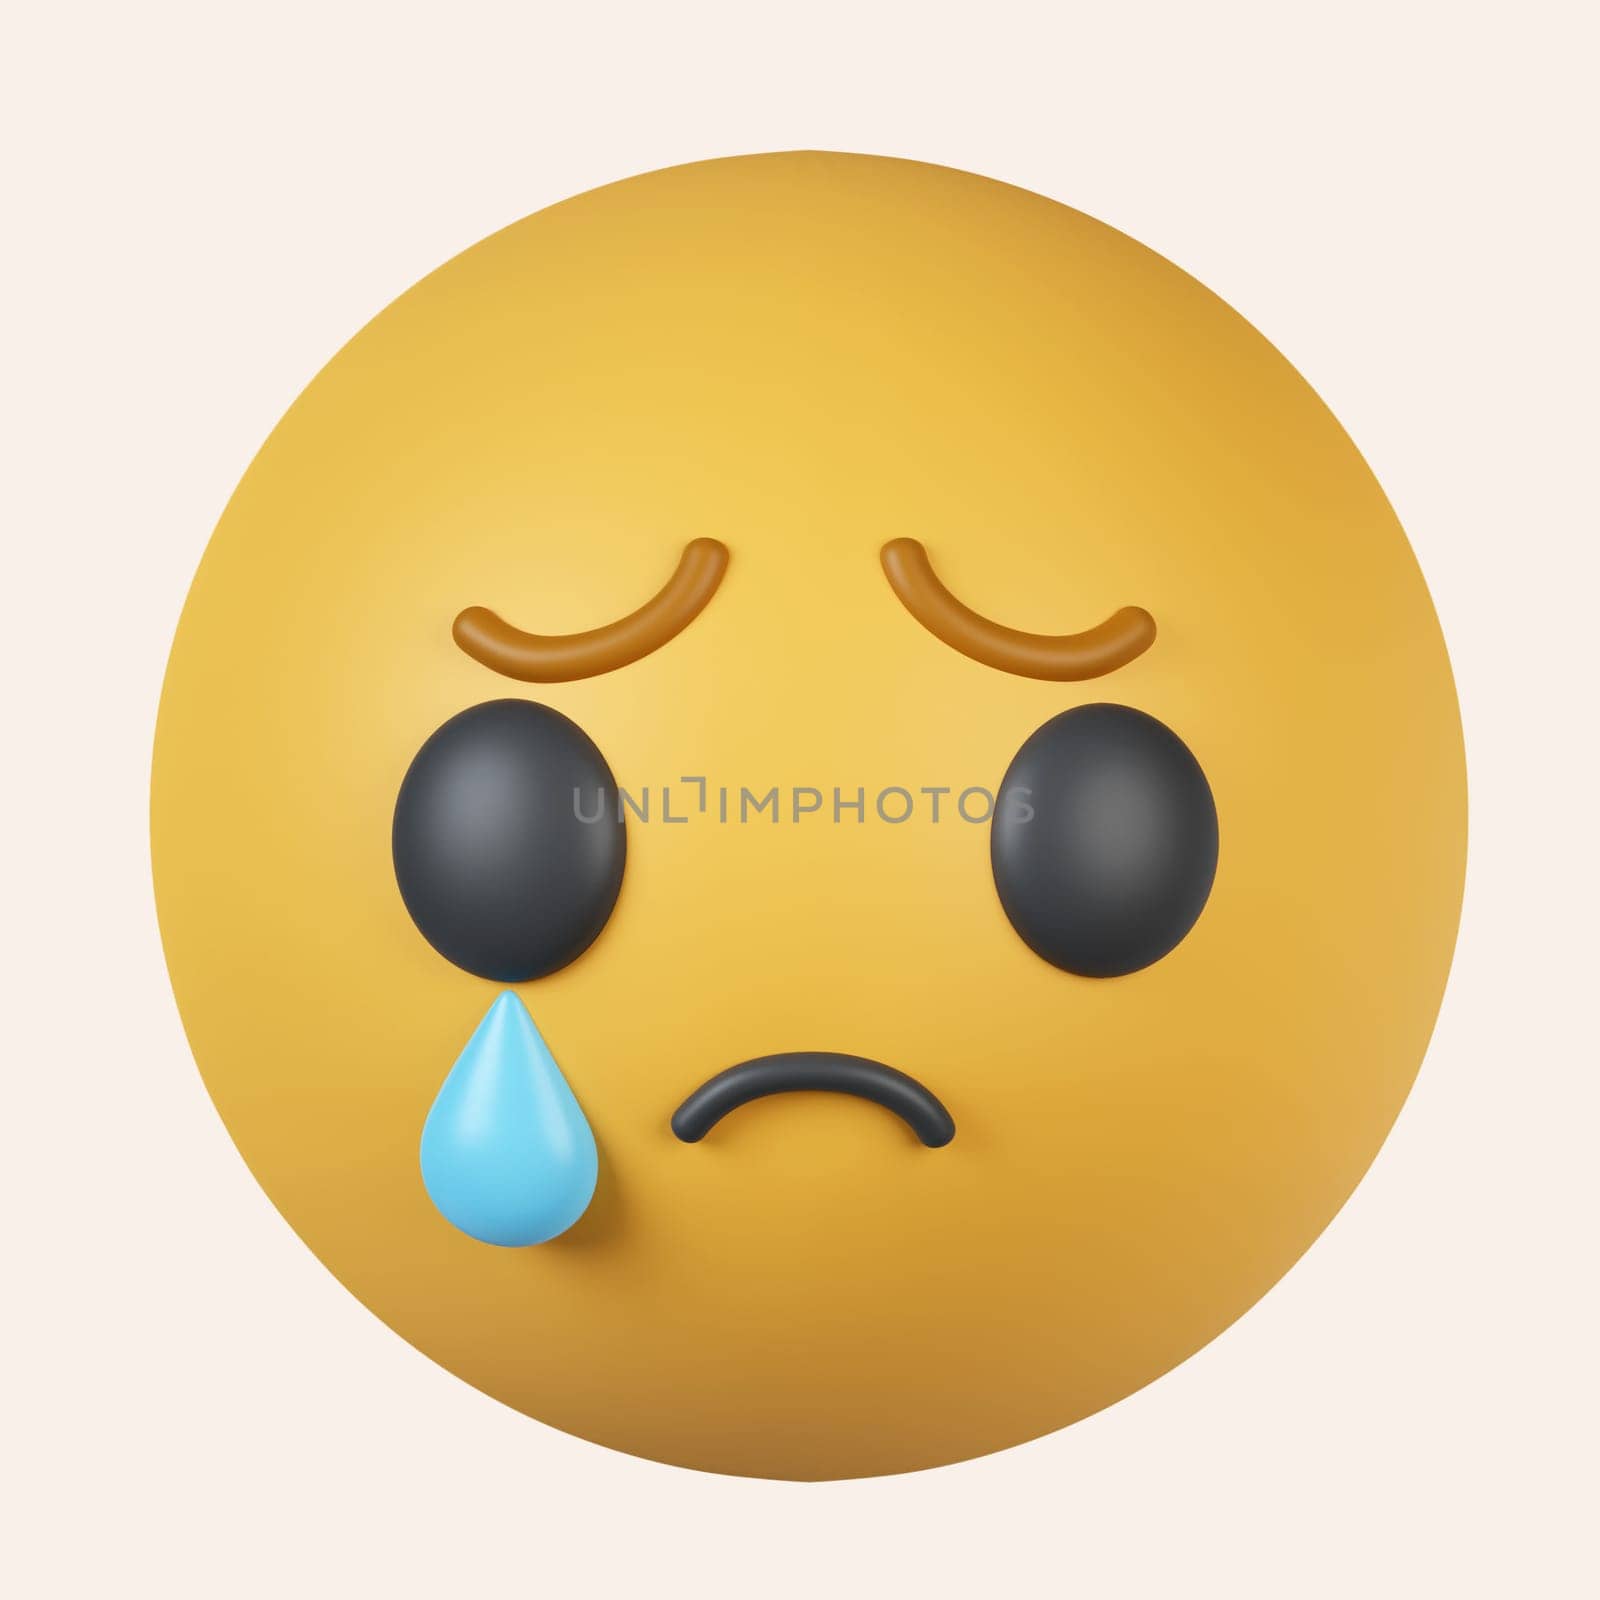 3d Sad Crying Emoticon. Render Cry Emoji with Tear. Unhappy Face. Communication, Web, Social Network Media. icon isolated on gray background. 3d rendering illustration. Clipping path..